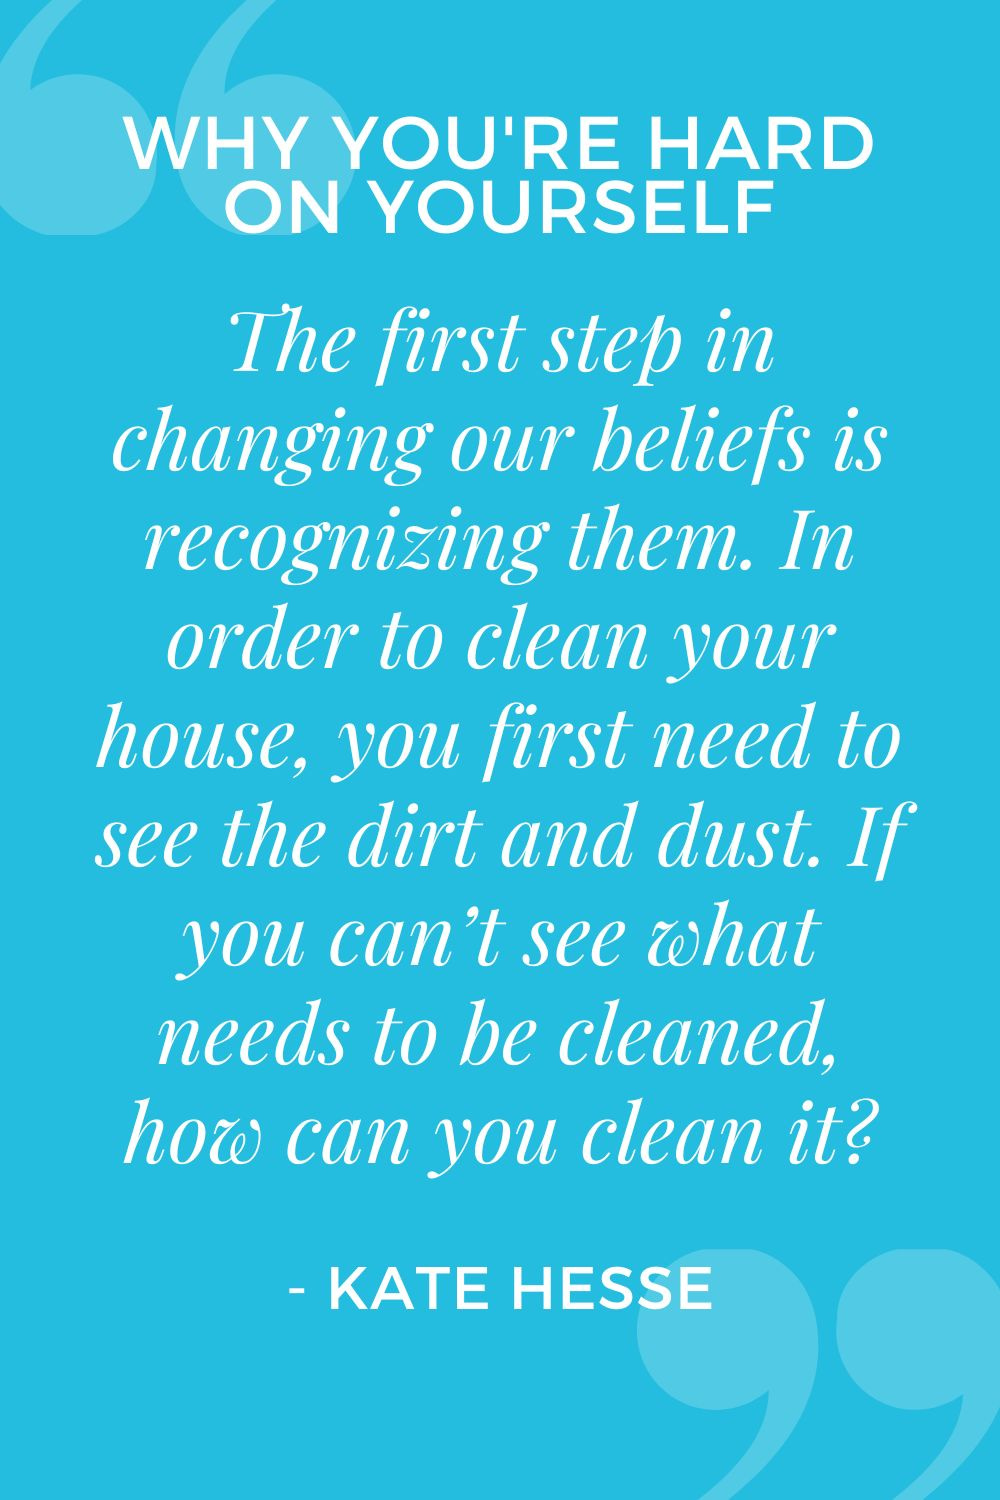 The first step in changing our beliefs is recognizing them. In order to clean your house, you first need to see the dirt and dust. If you can't see what needs to be cleaned, how can you clean it?